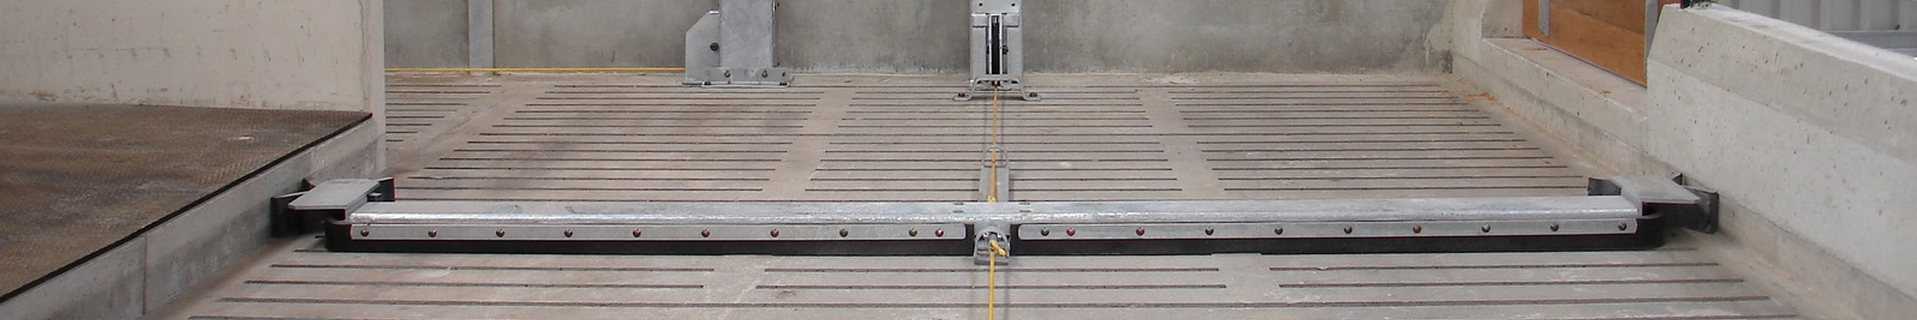 Control panels for Spinder rope-driven manure scraper installation